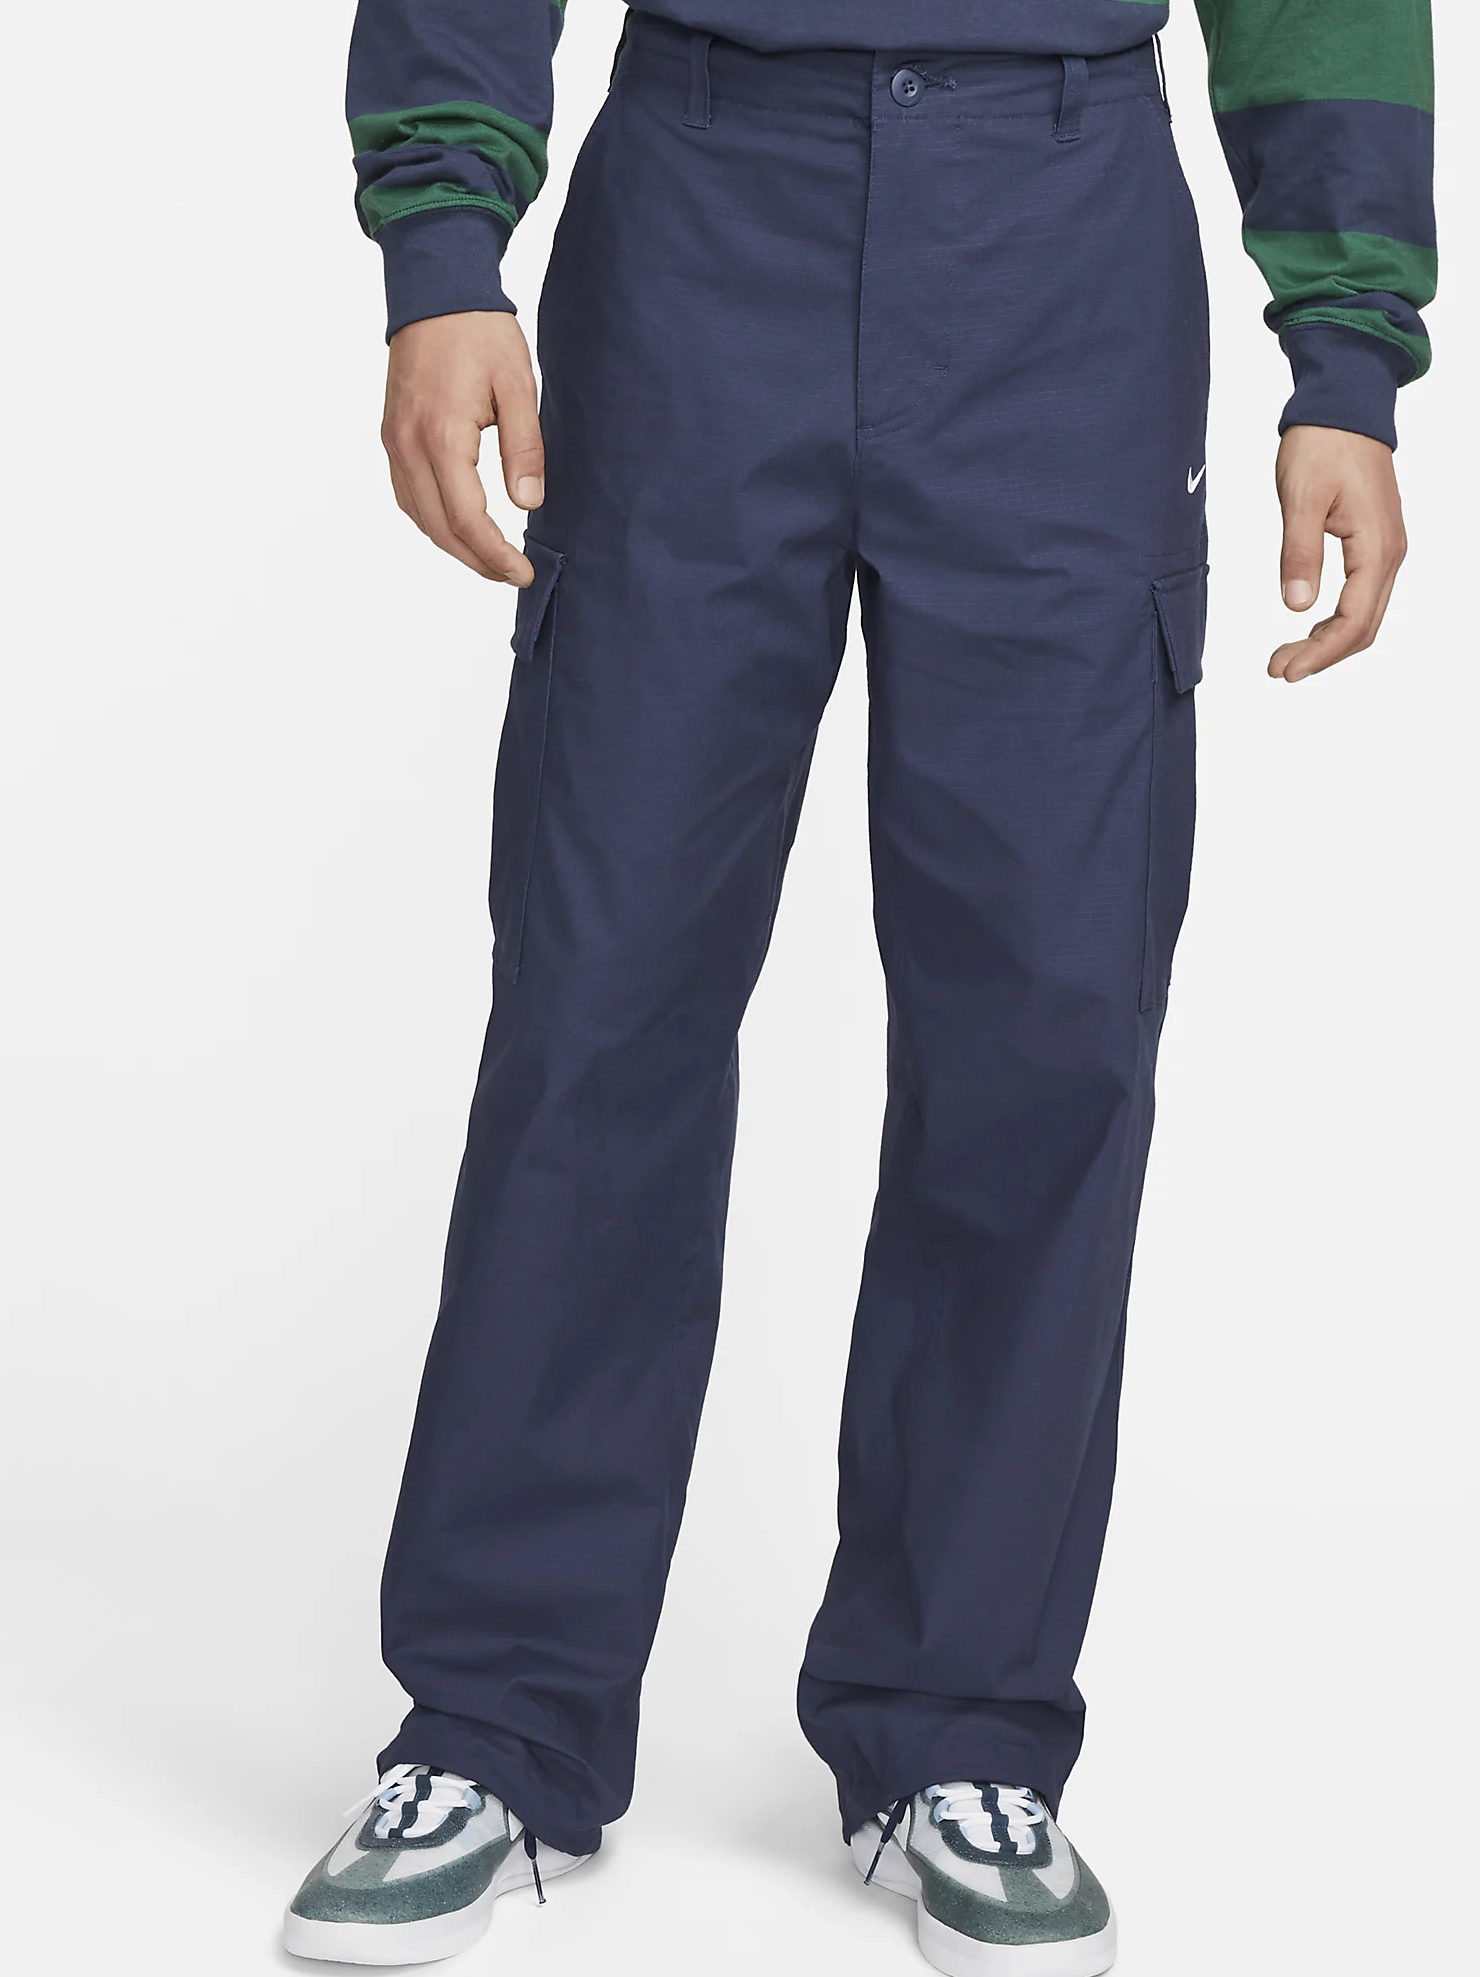 Navy Blue Men's Latest Cotton Cargo Pant with Six Pockets